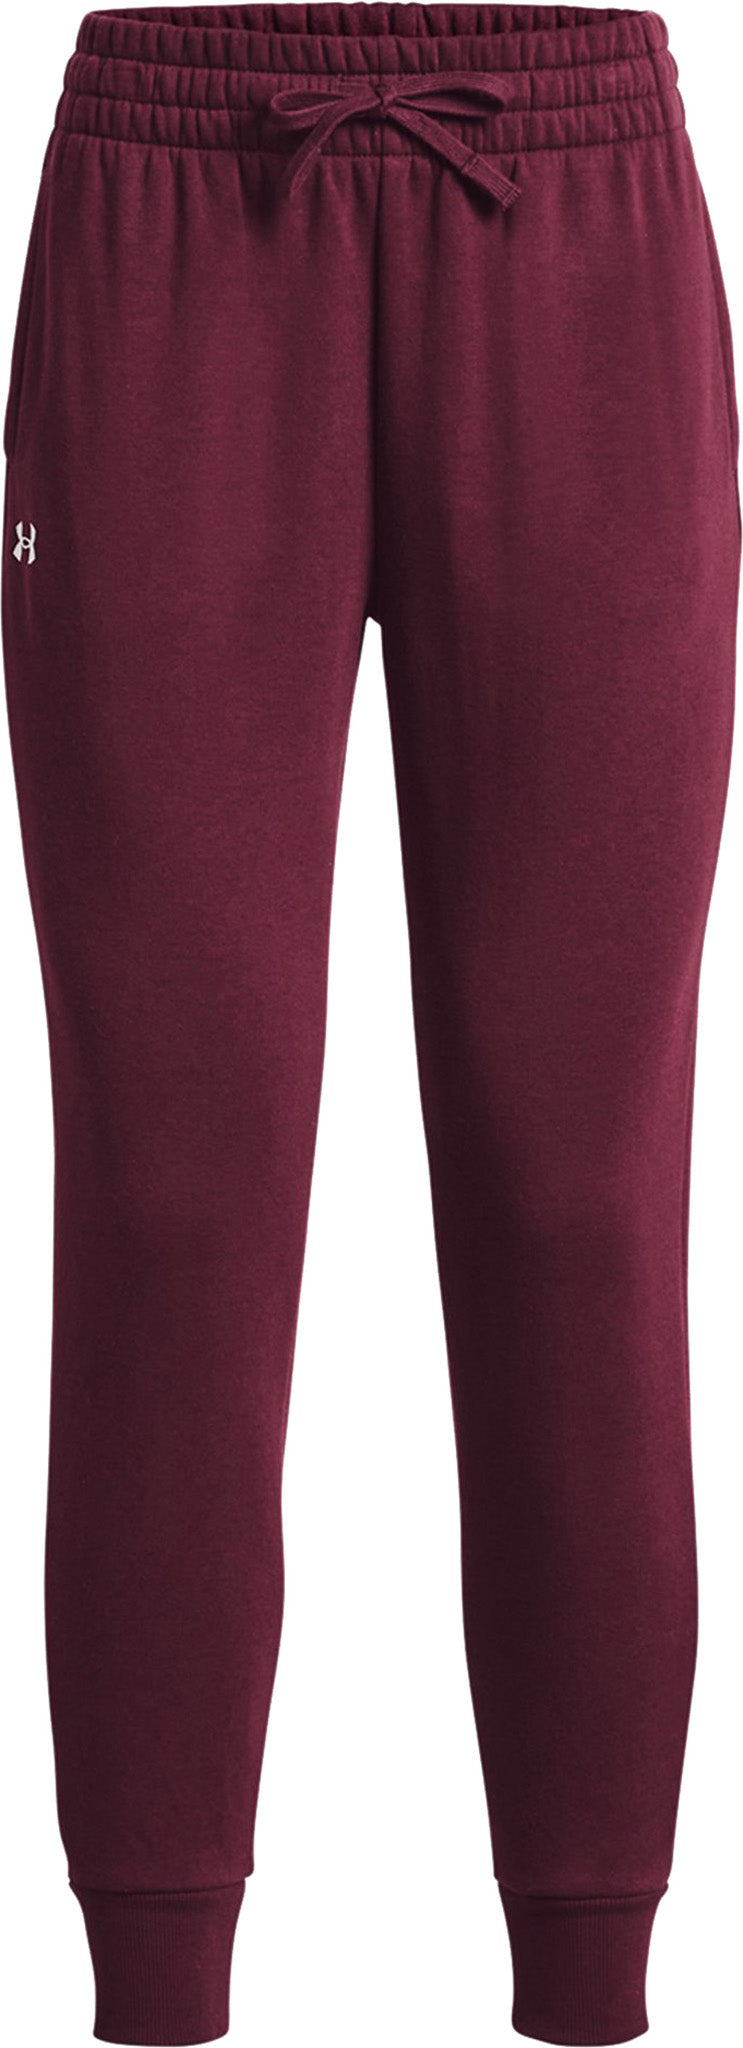  Under Armour Women's UA Rival Fleece Tapered Pants